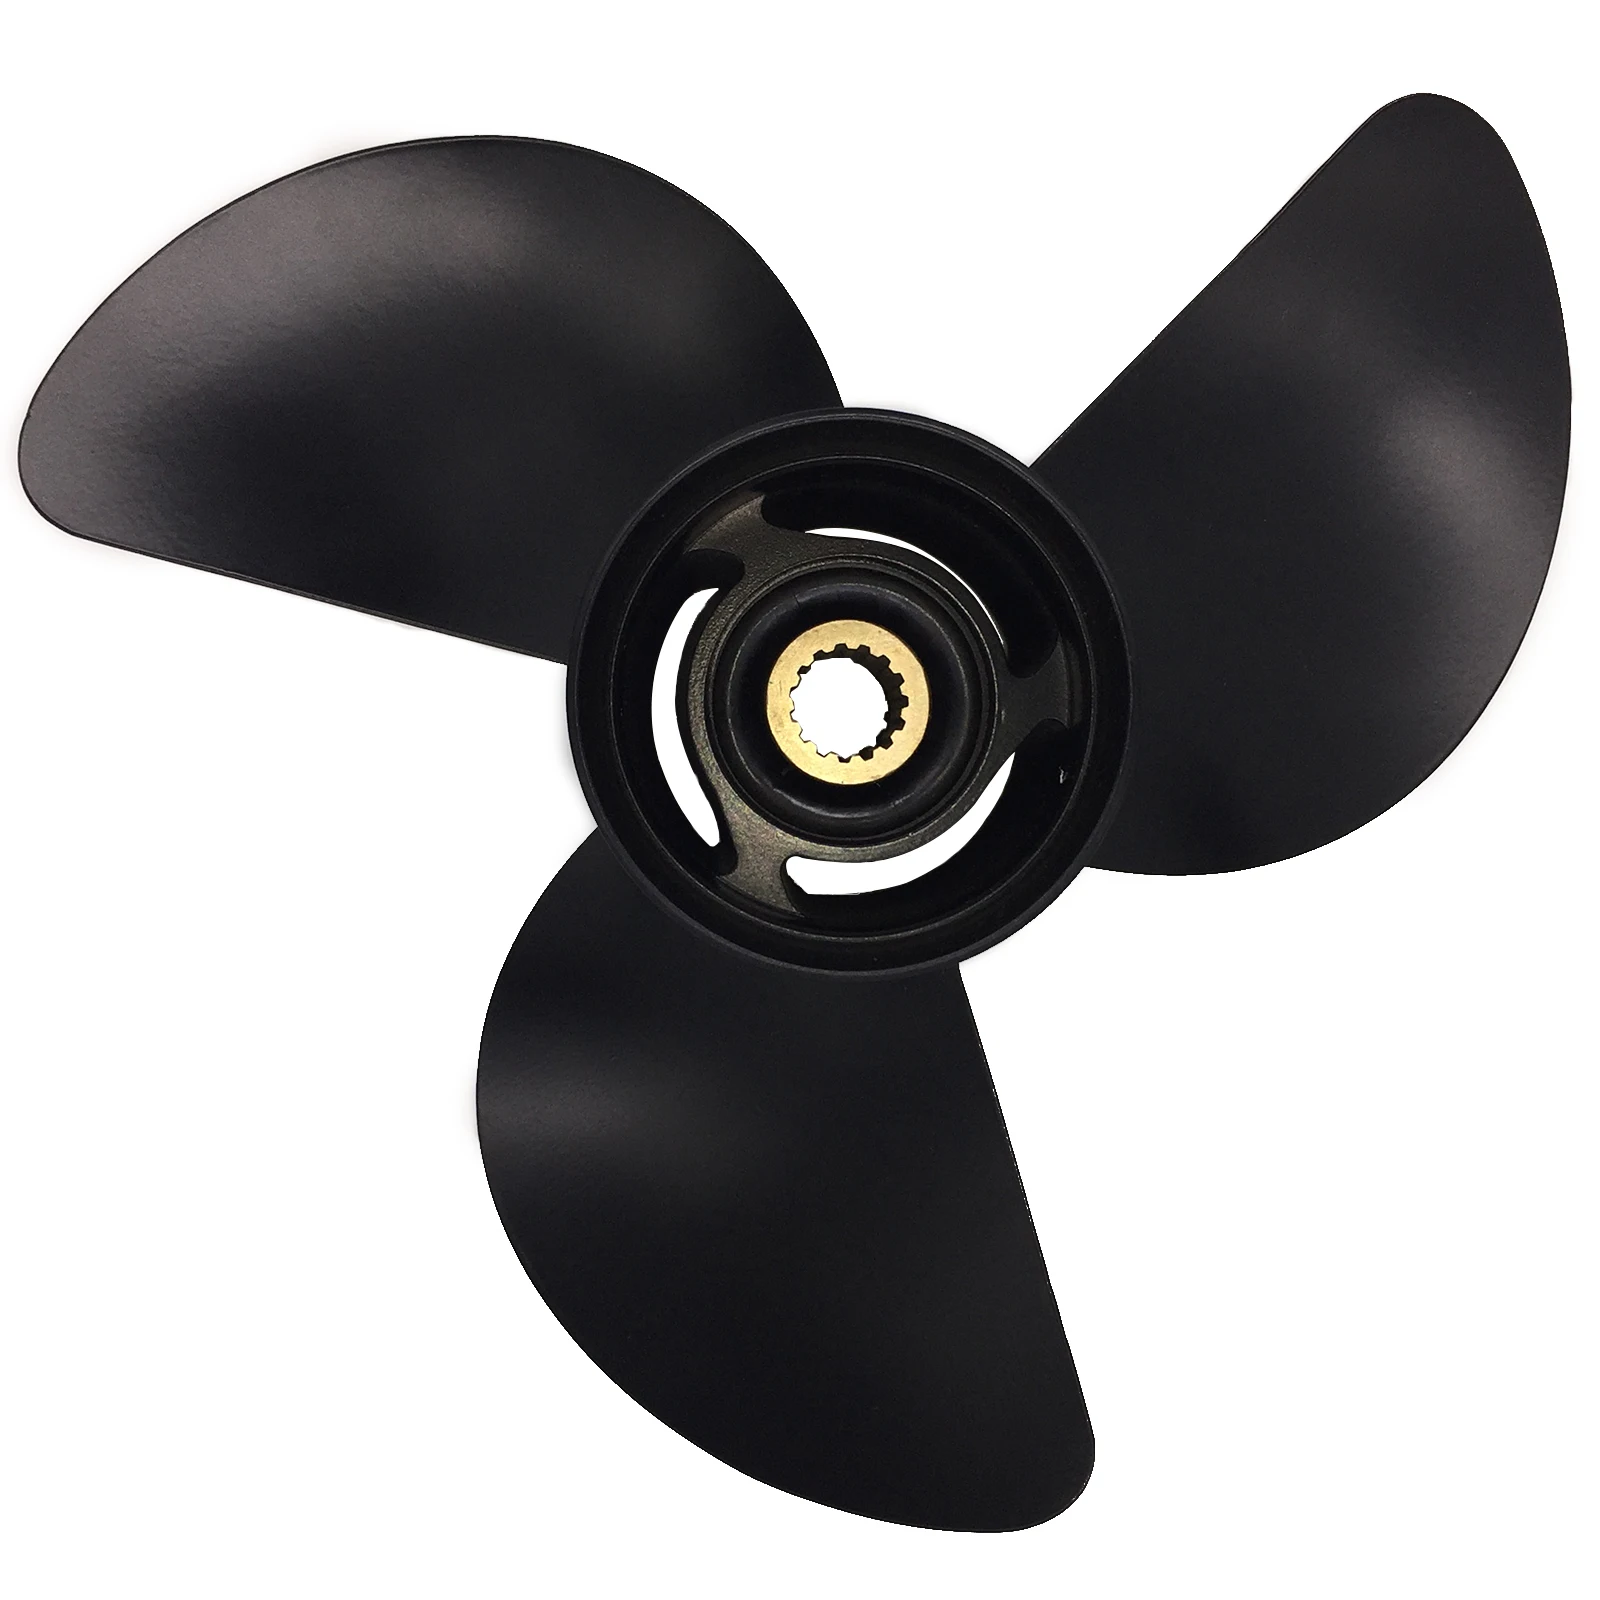 Boat Propeller 13.2x19 for Tohatsu 60HP-125HP 3 Blades Aluminum 15 Tooth RH OEM NO: 3HKB64541-0 13.2x19